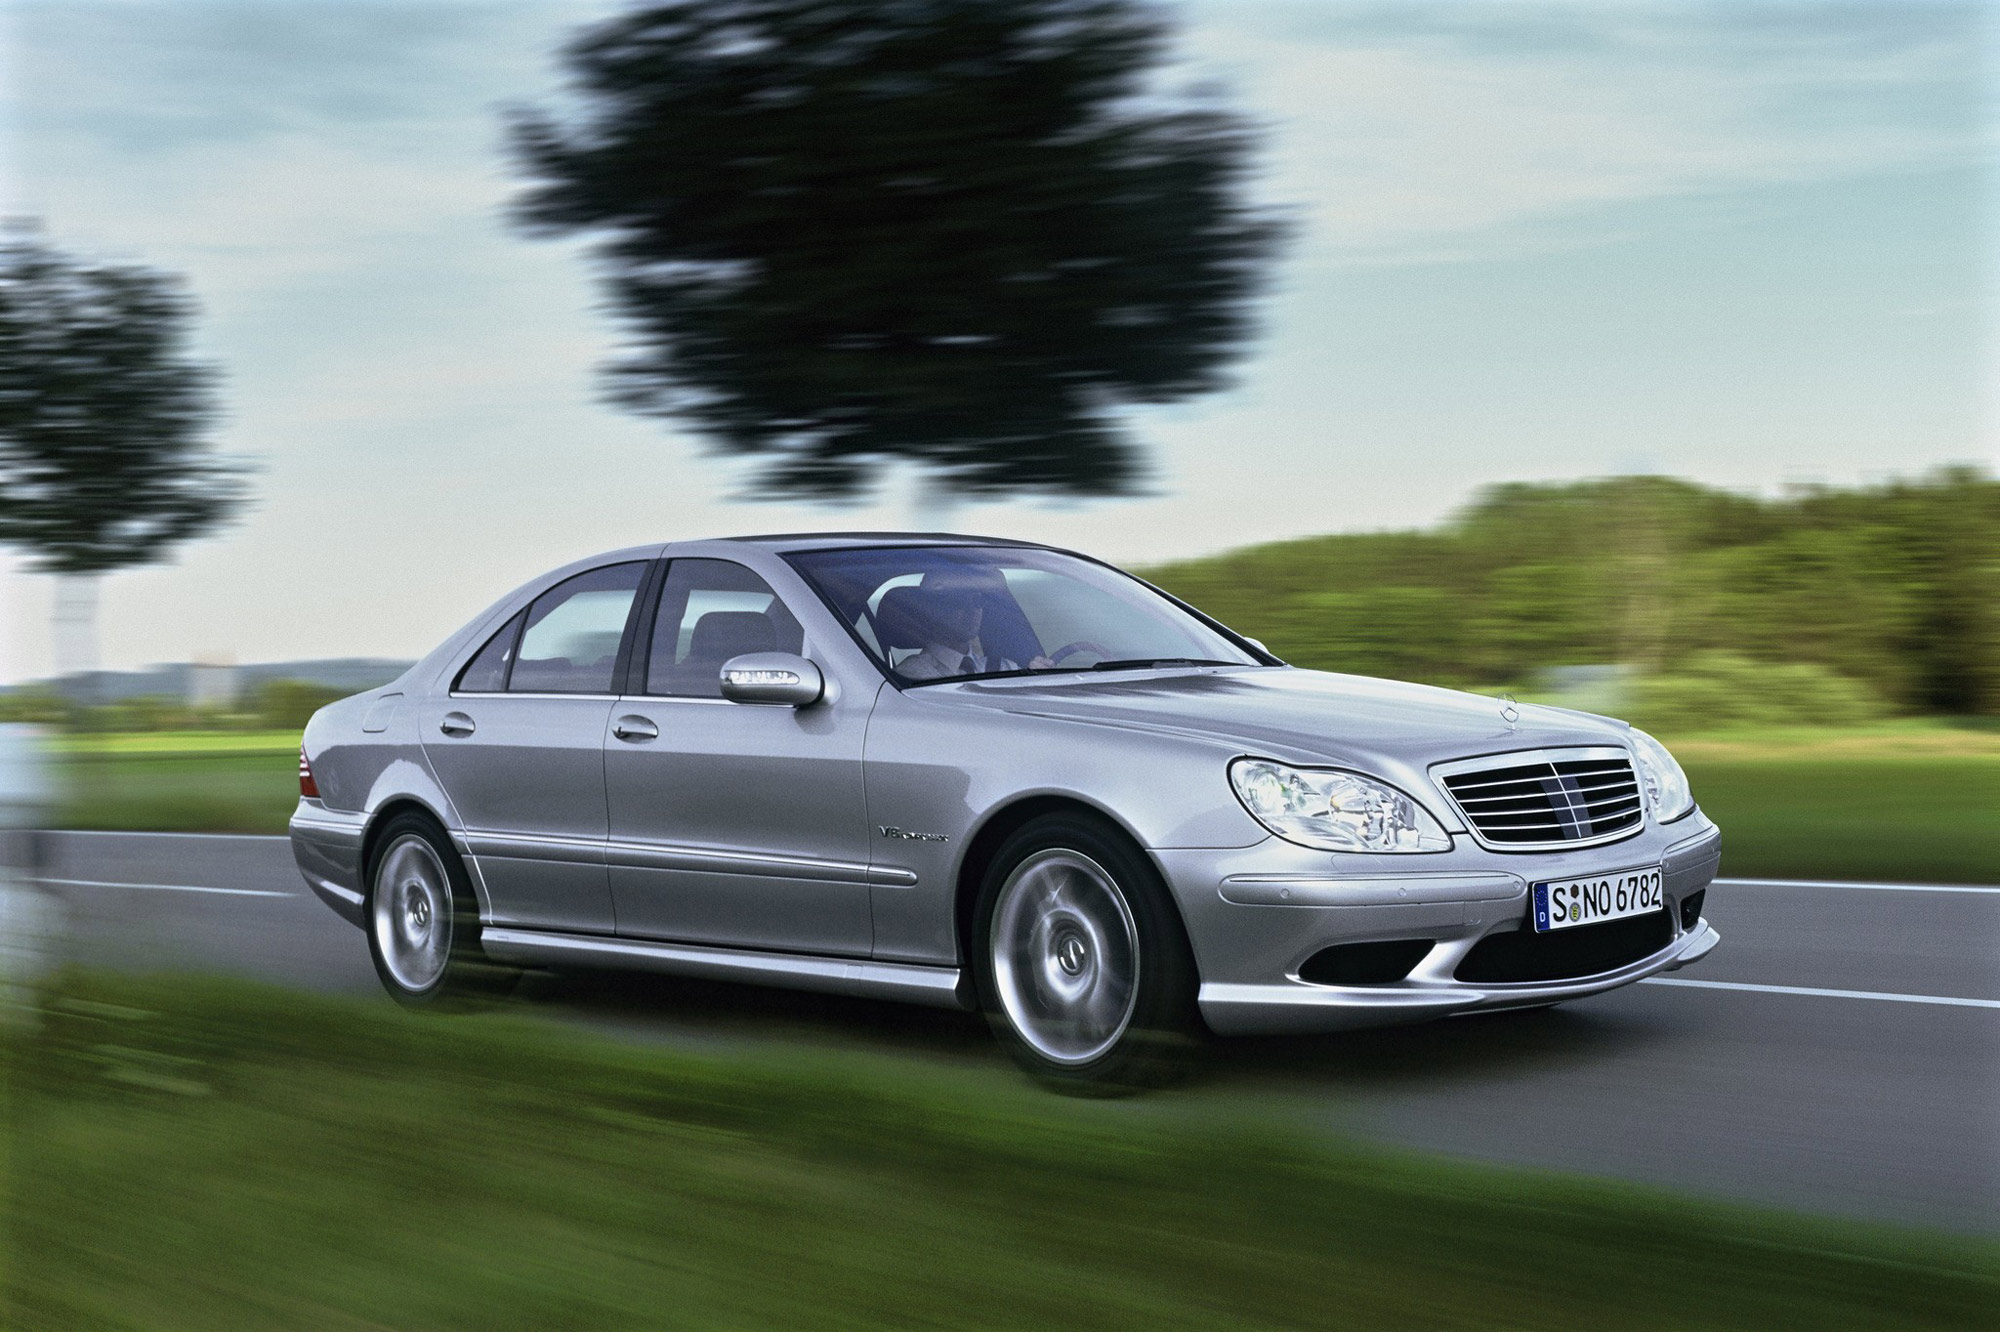 Silver 2004 Mercedes-Benz S-Class drives on country road.